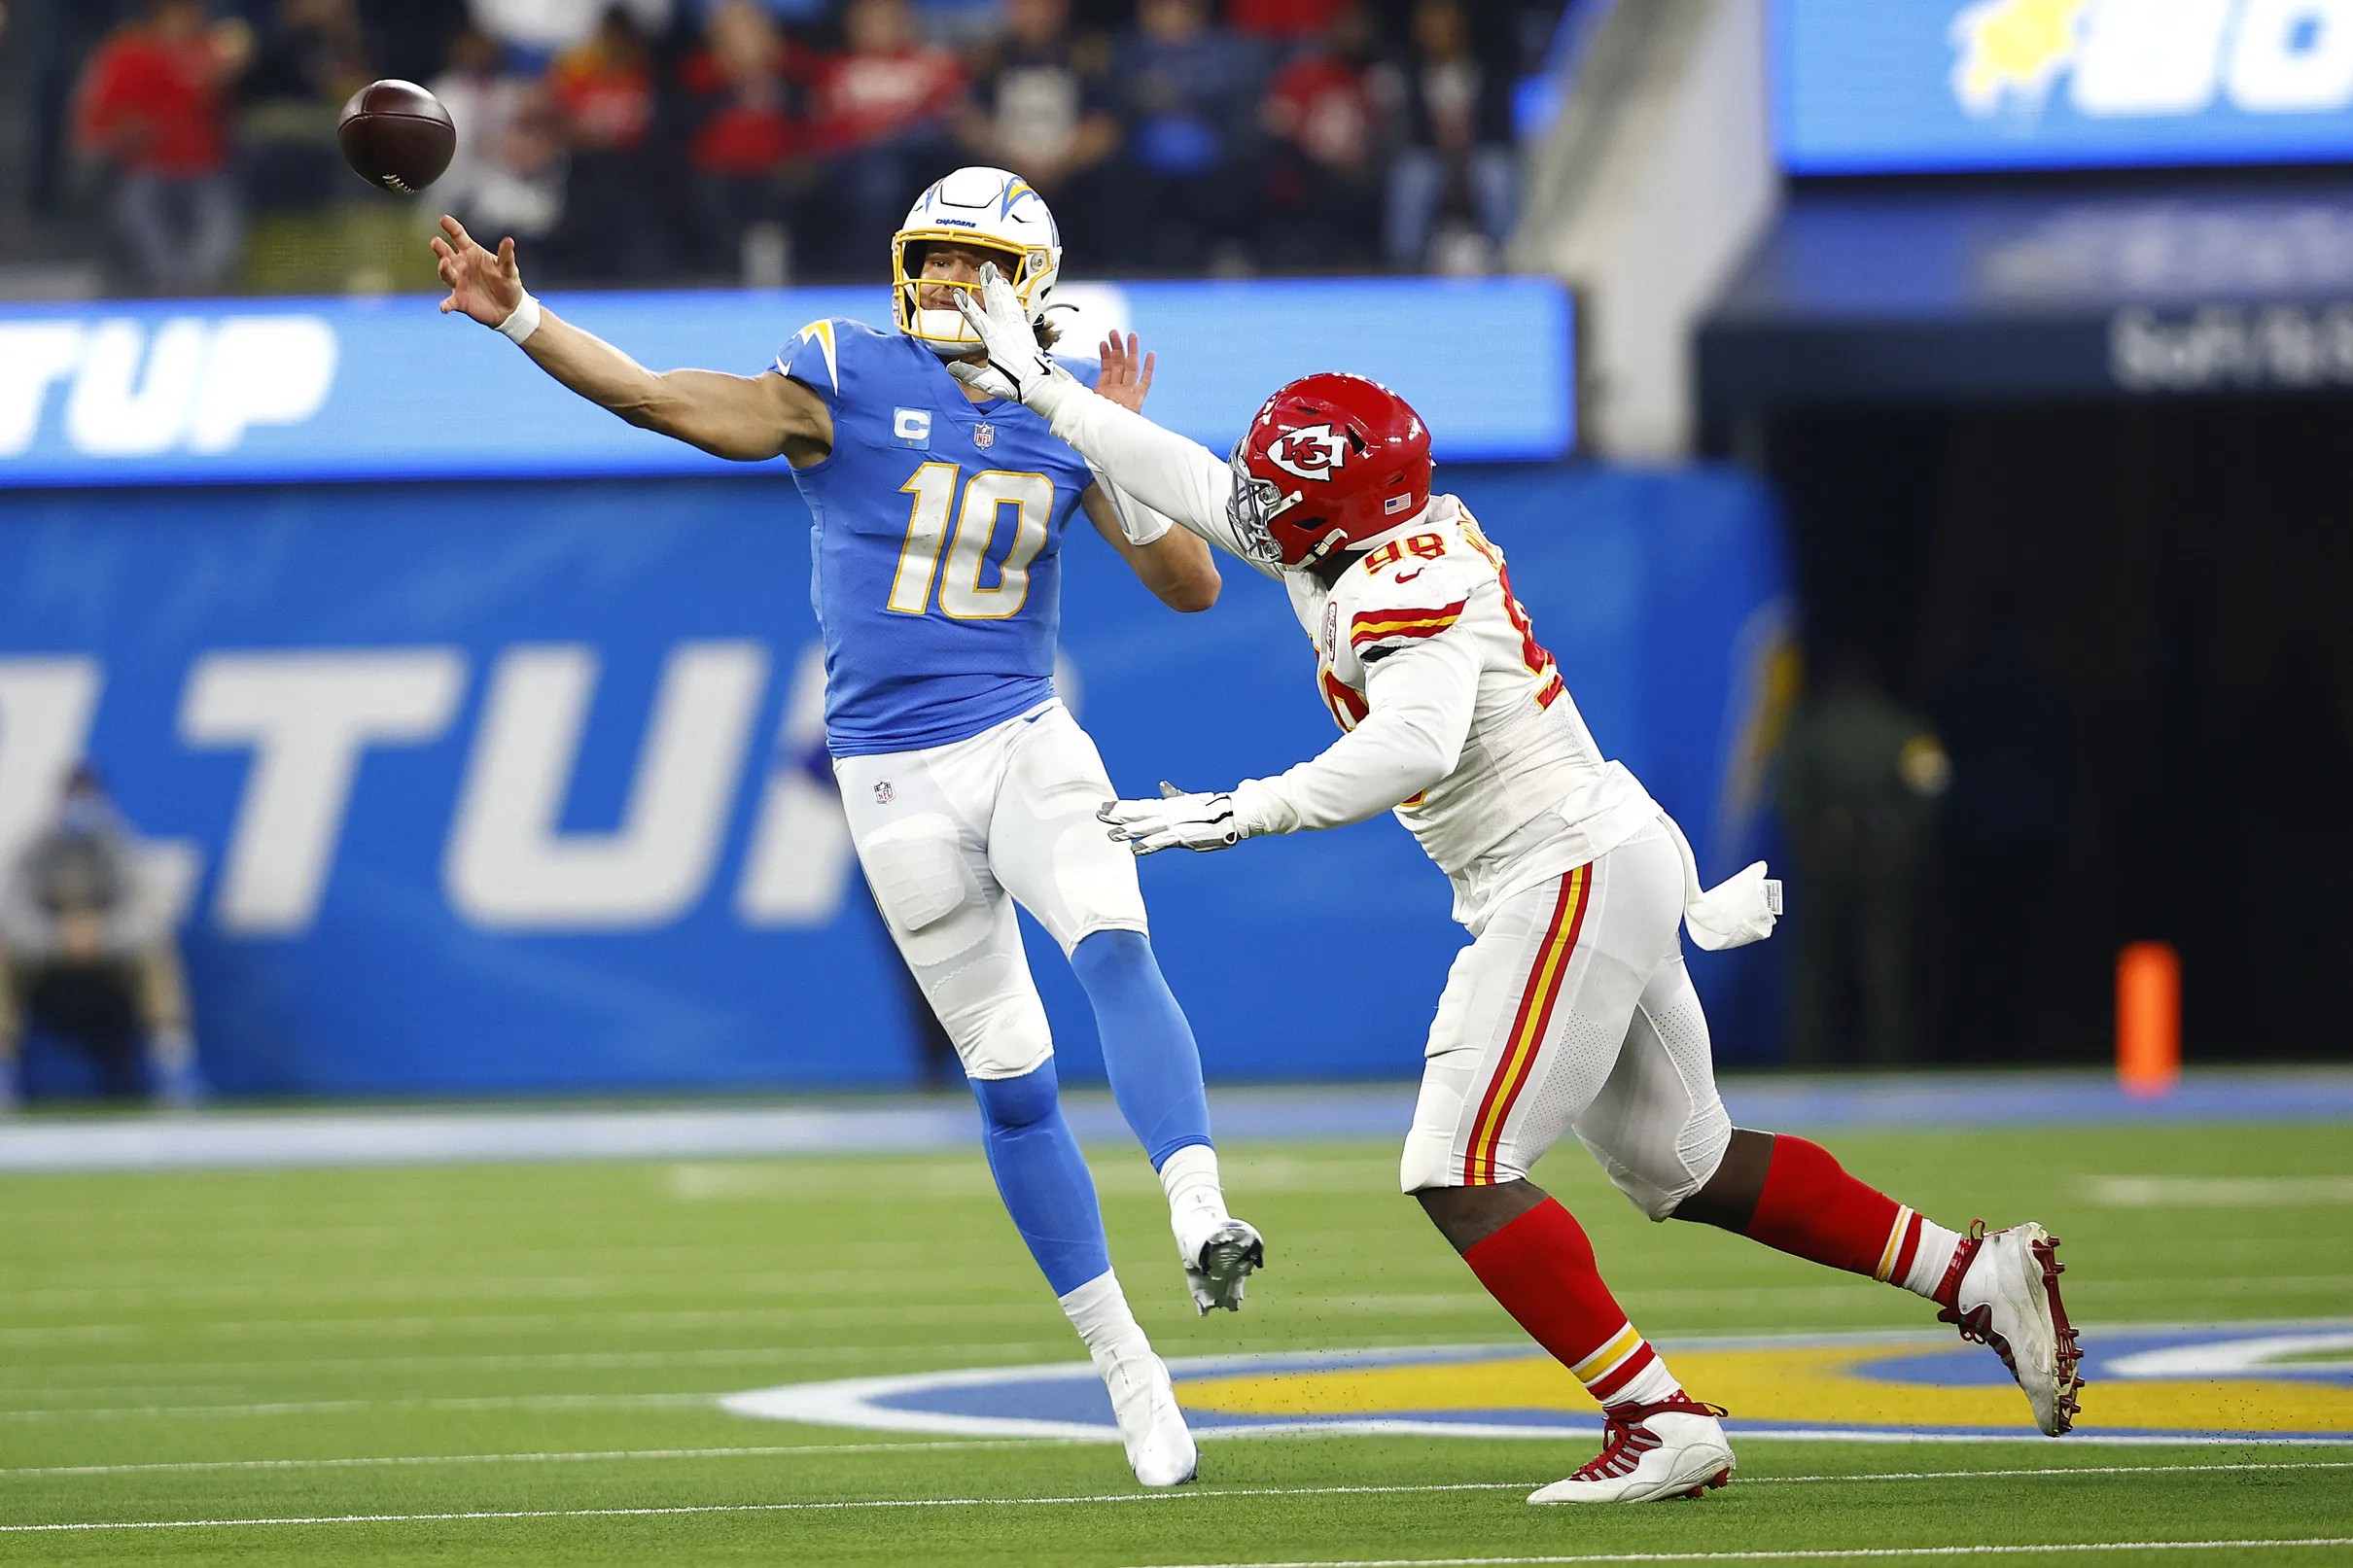 Chargers vs. Chiefs named a top5 primetime game of 2022